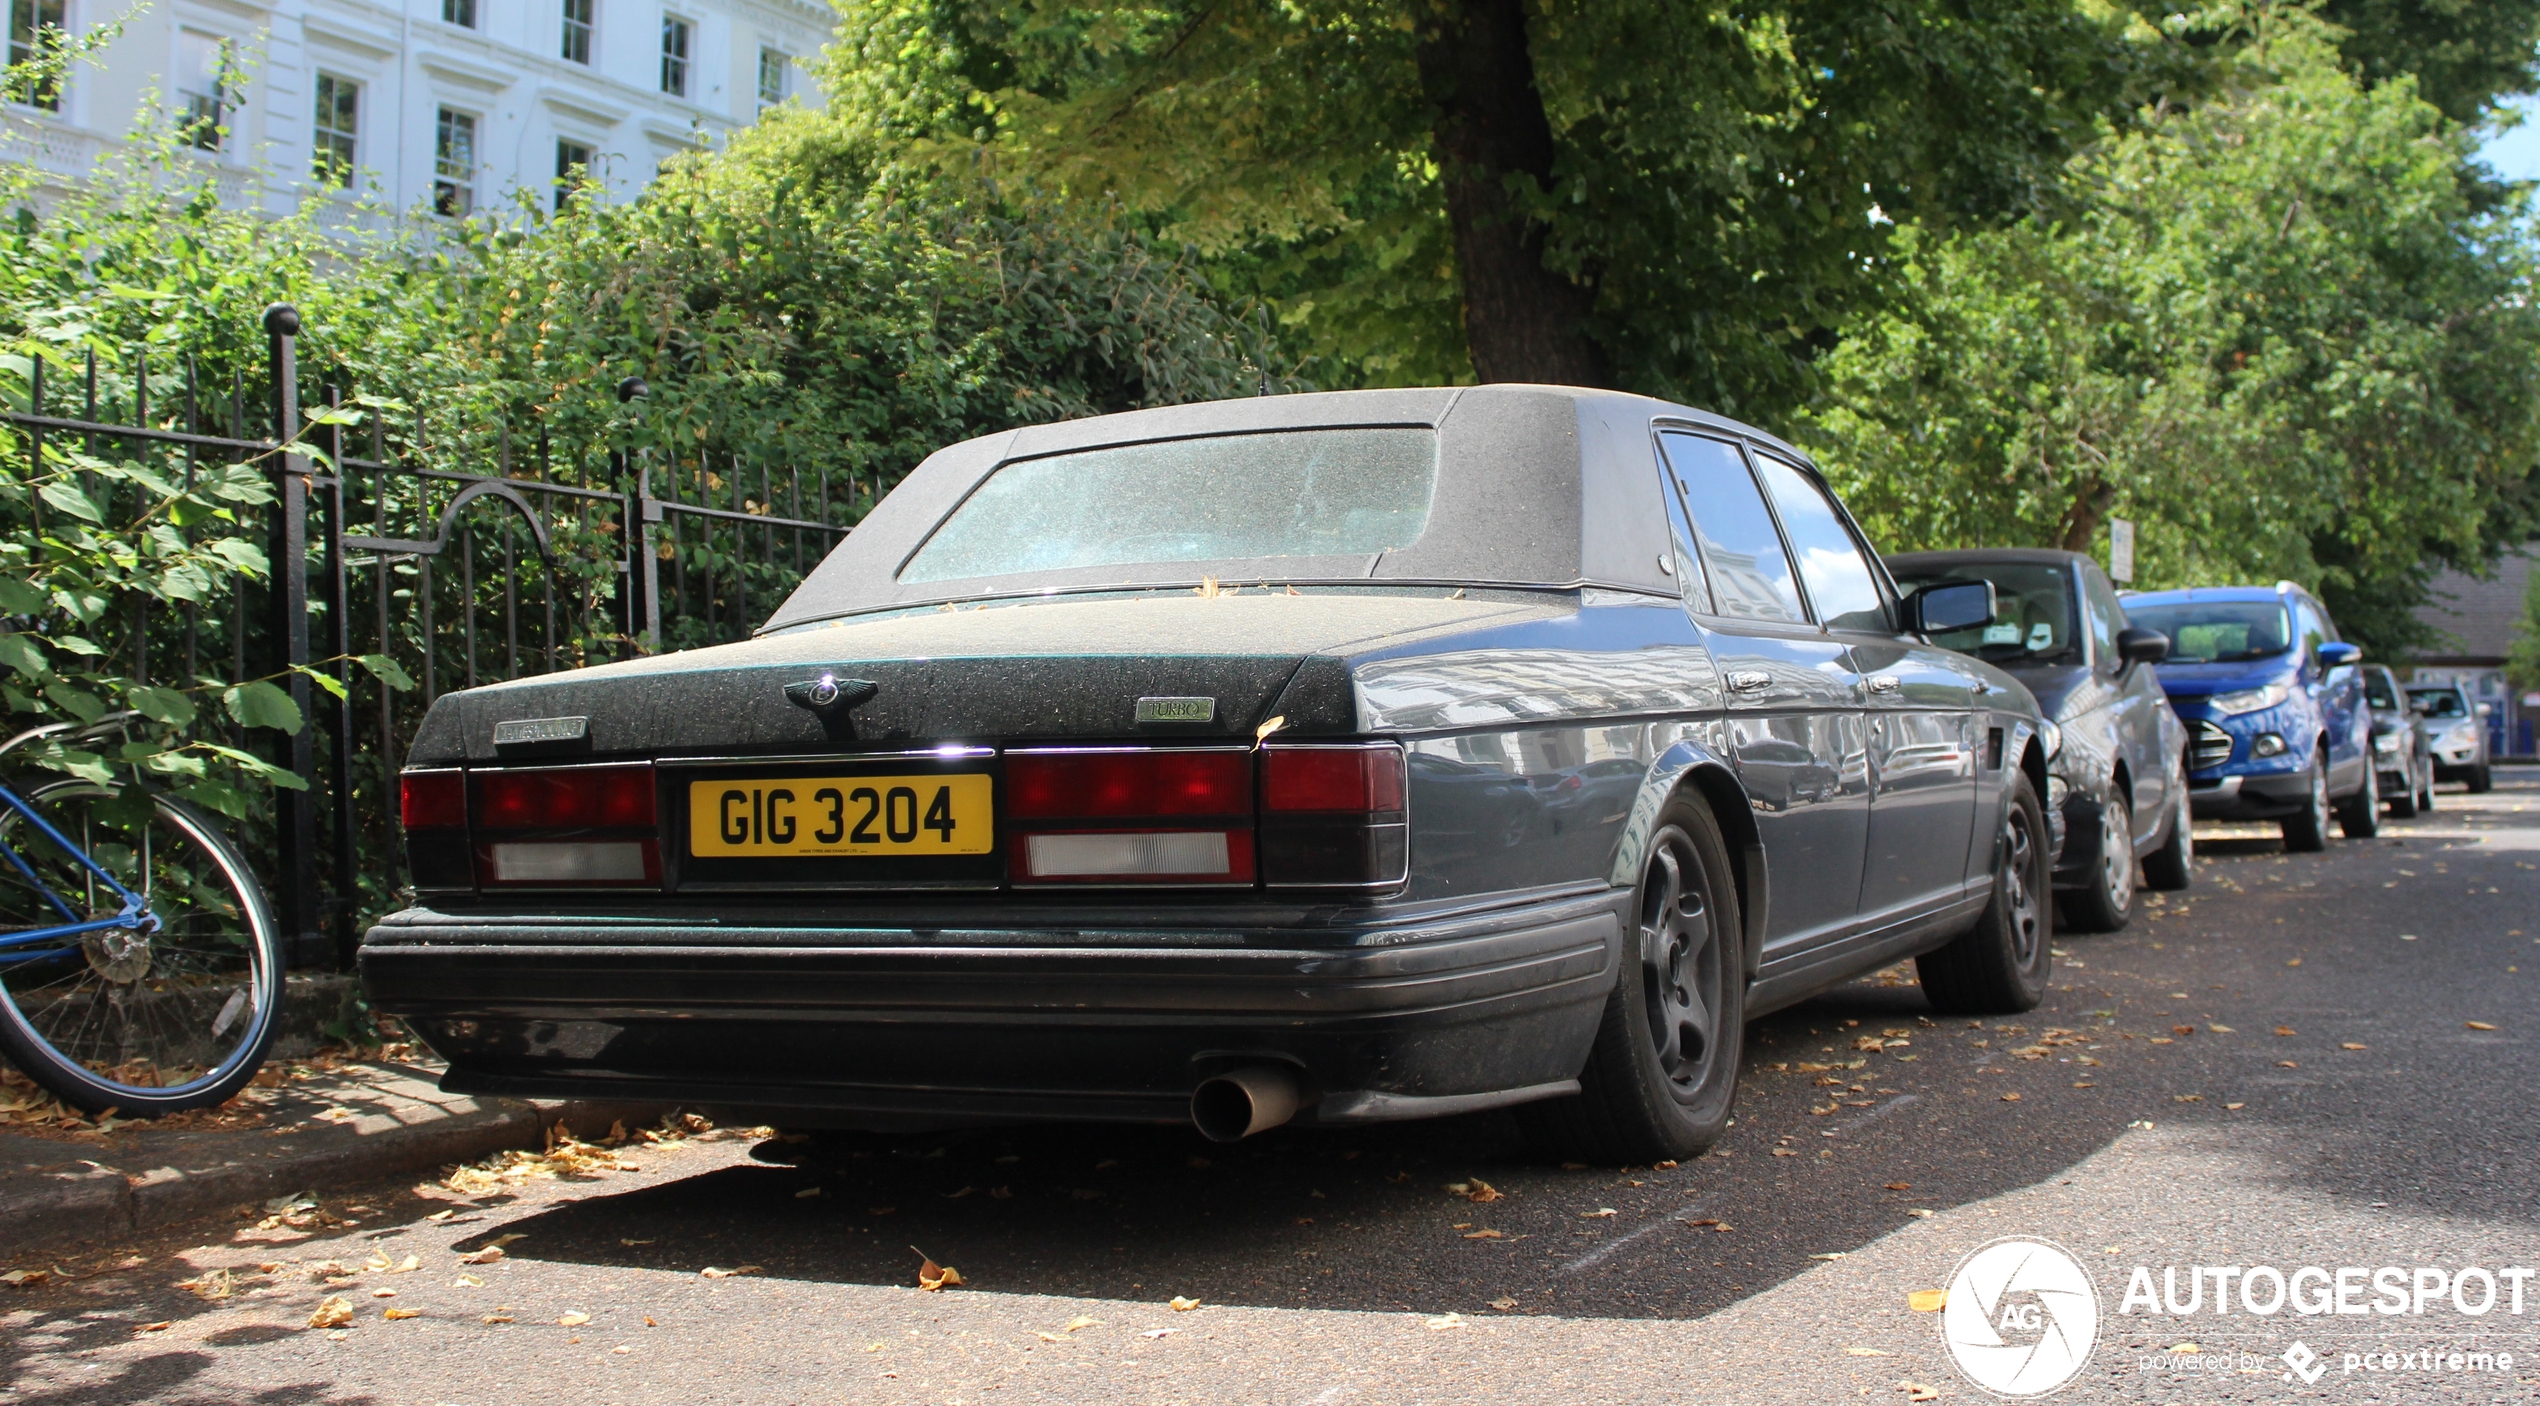 Bentley Turbo R by James Young